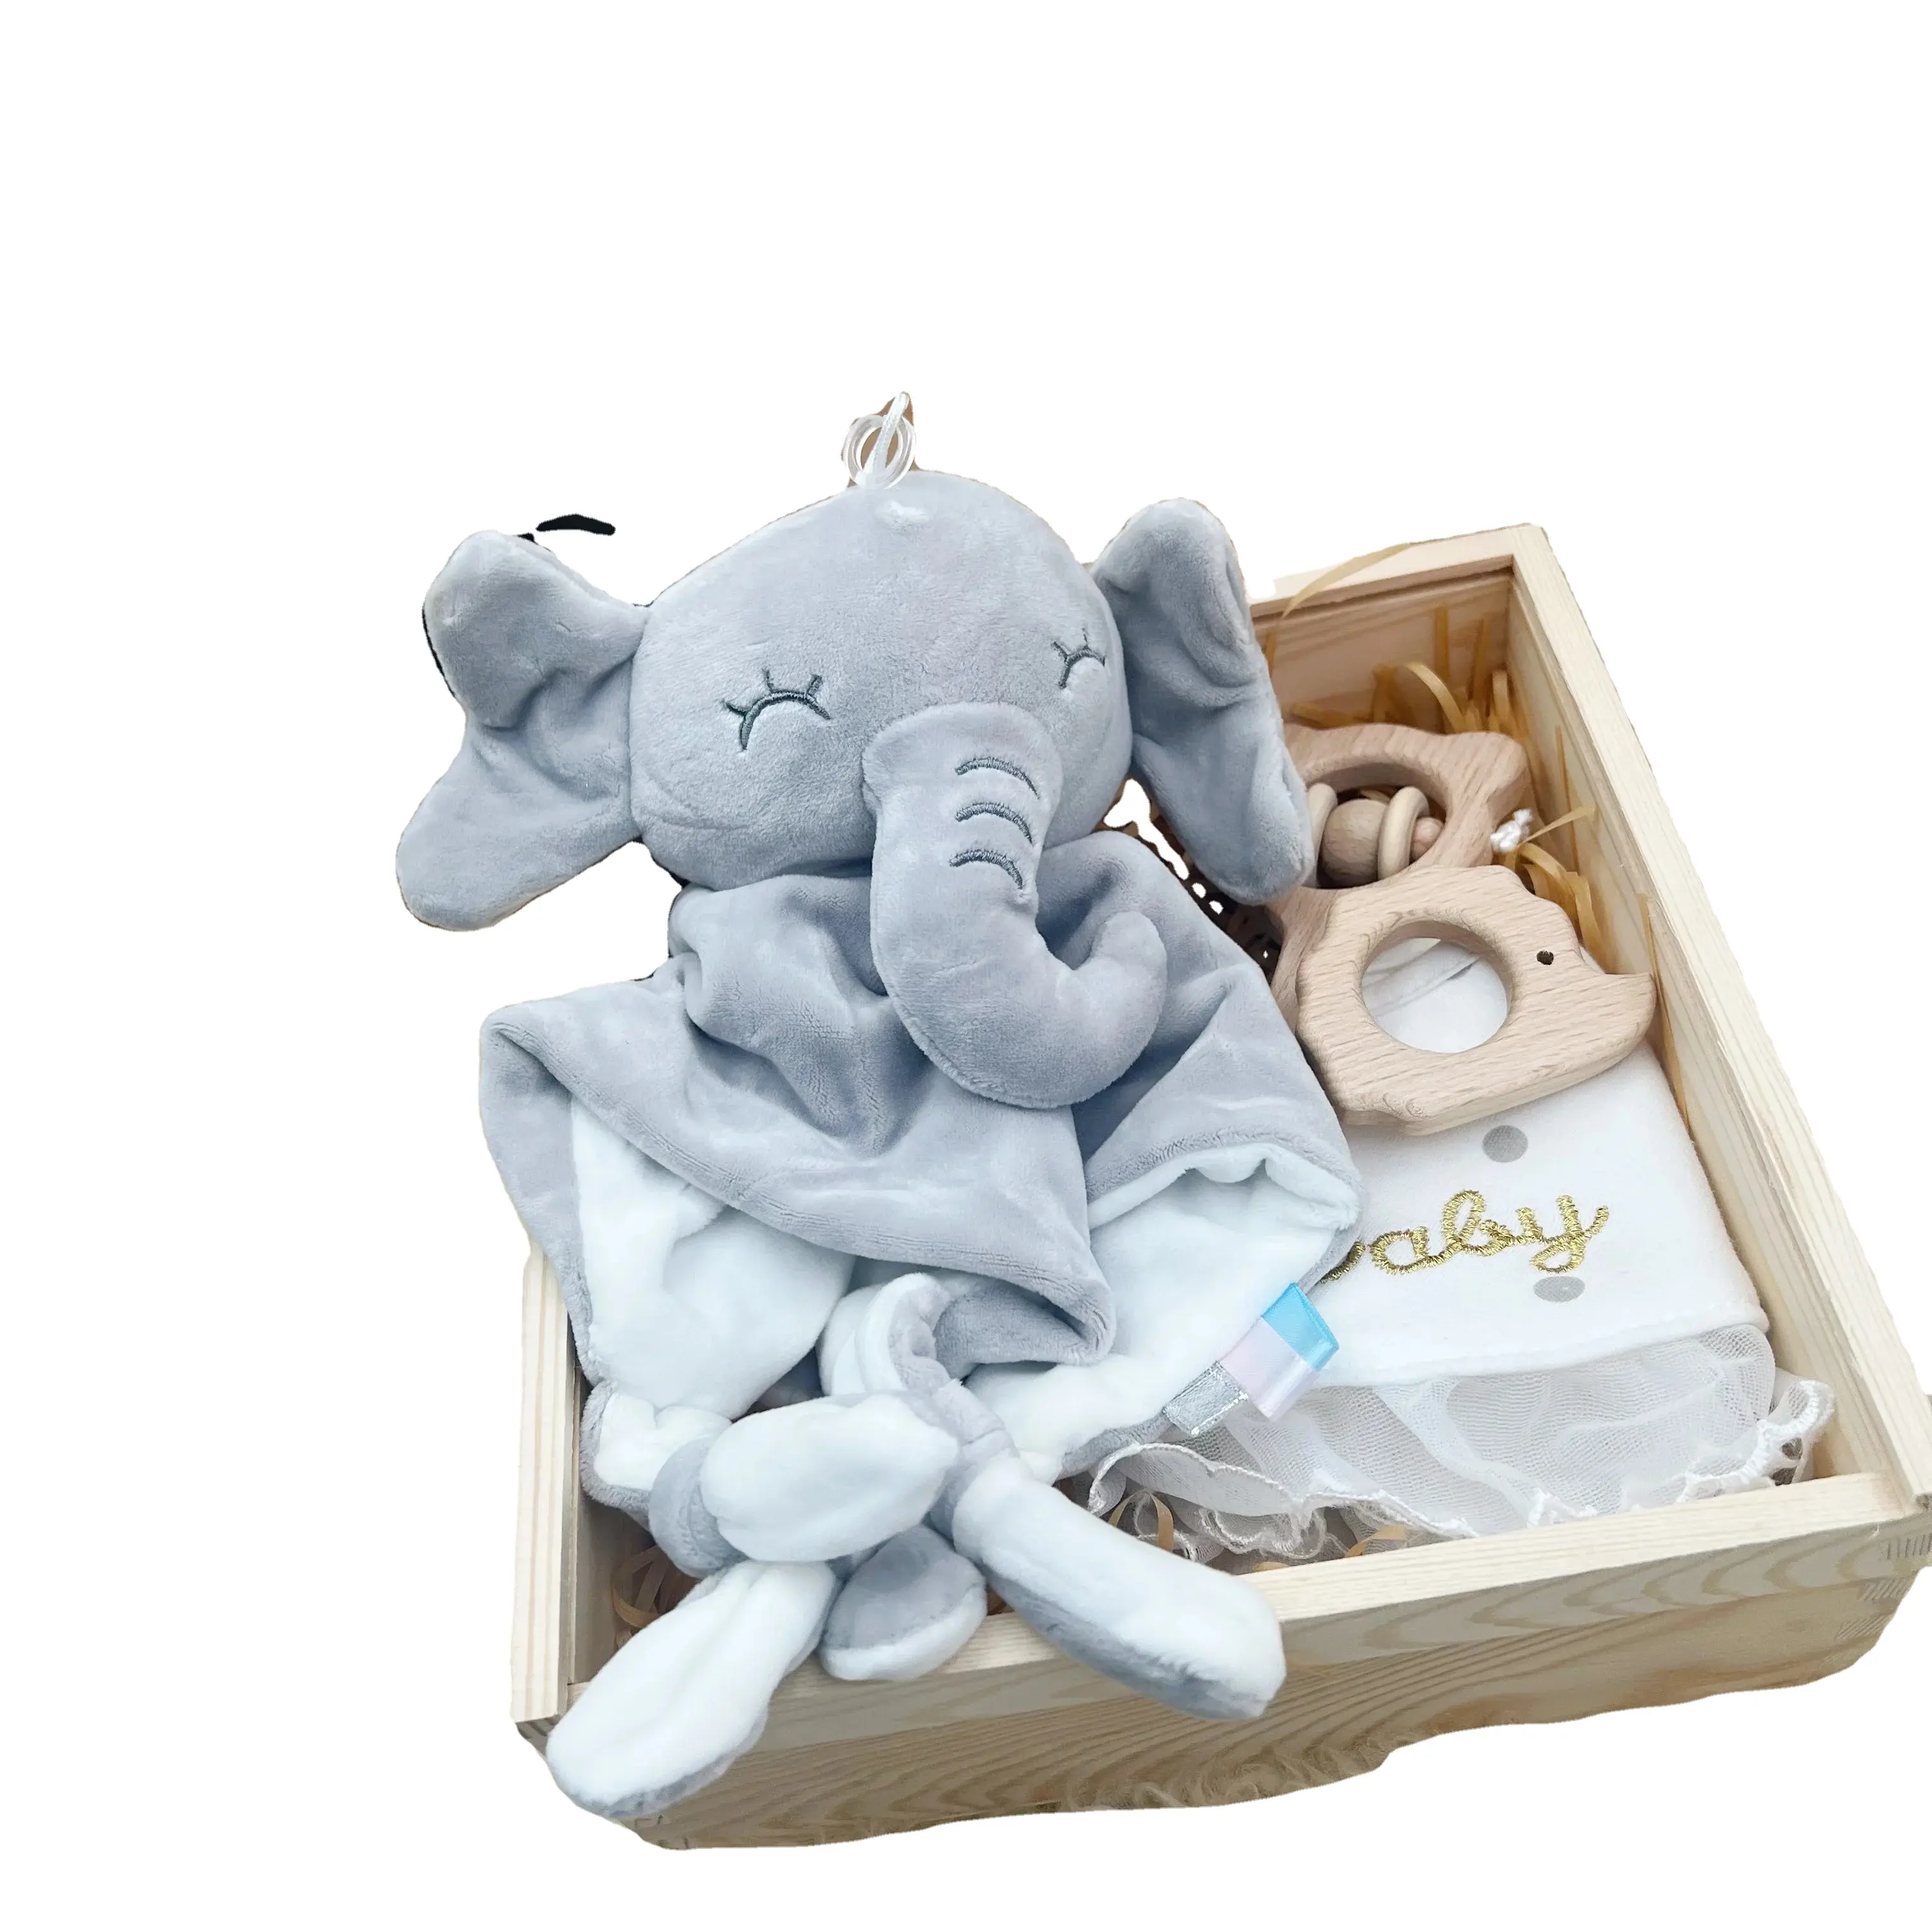 Zoo baby full moon wooden toy gift box supports small batch customization.